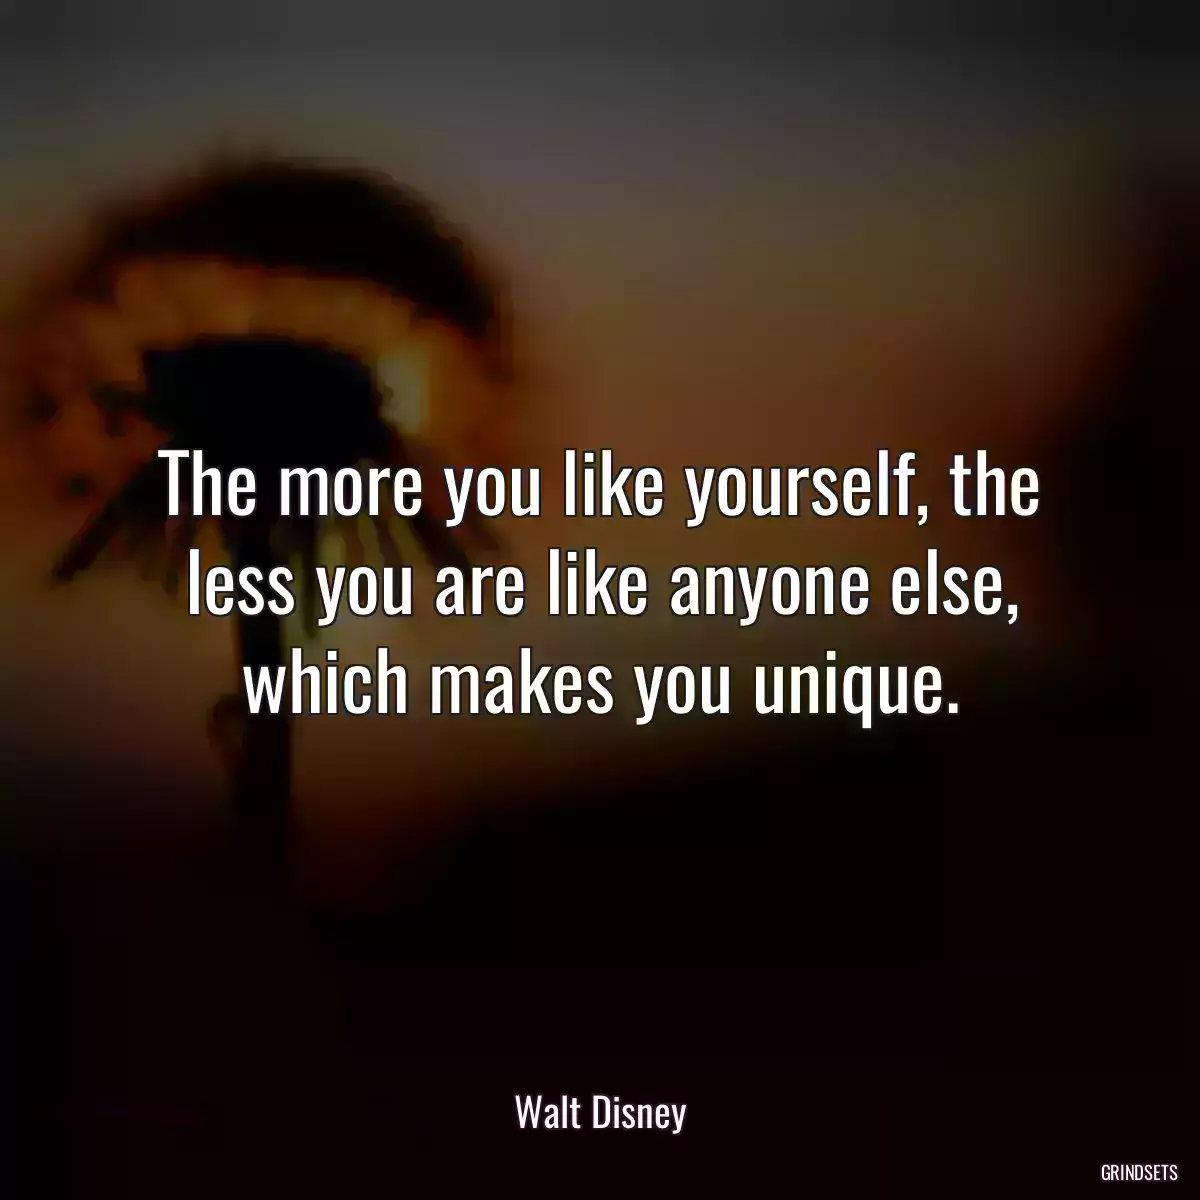 The more you like yourself, the less you are like anyone else, which makes you unique.